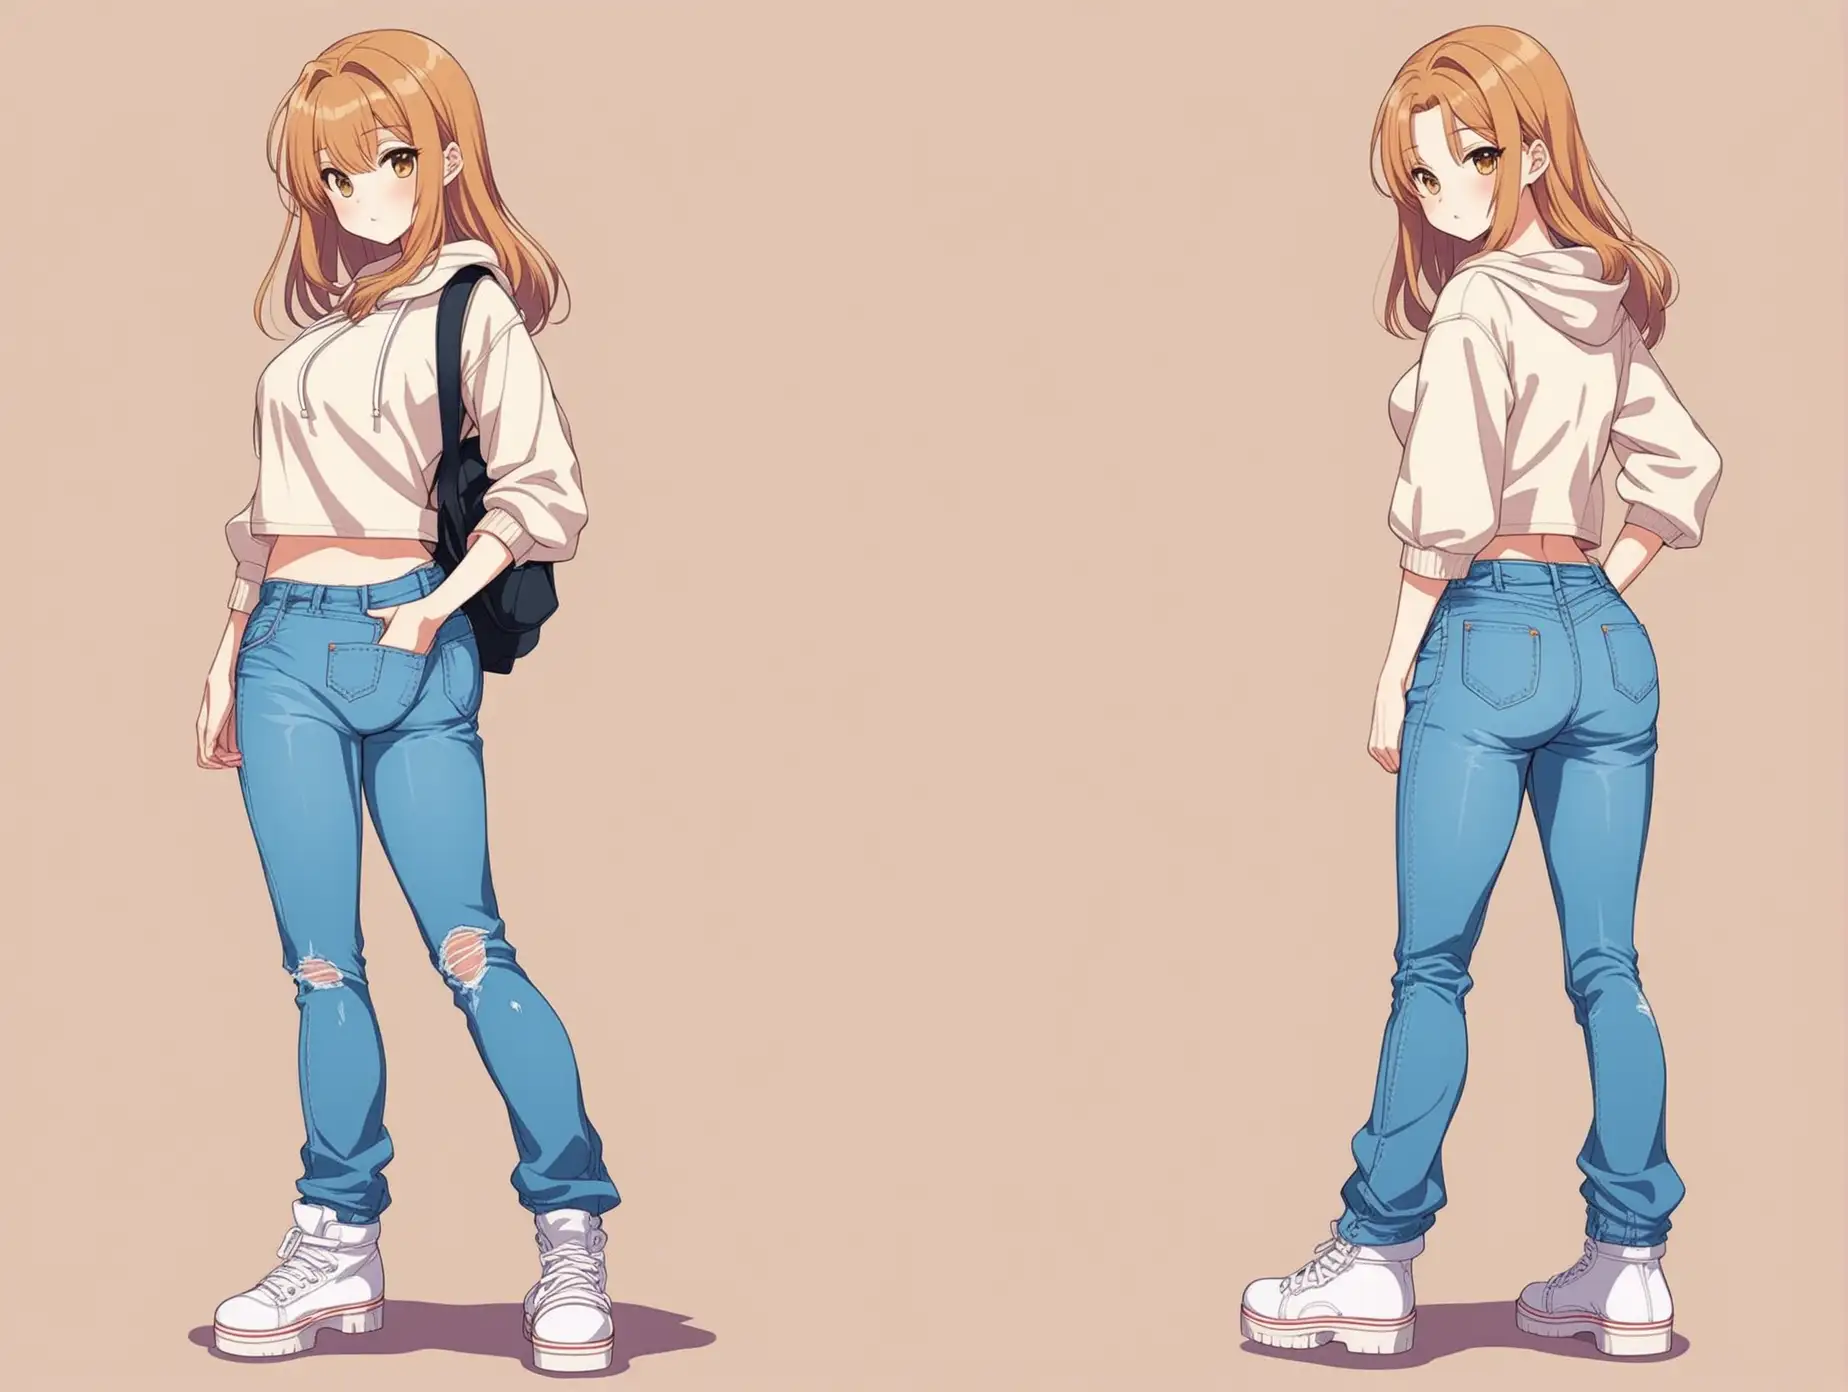 Full body picture sensual anime girl wearing small feet old school boot sneakers and jeans